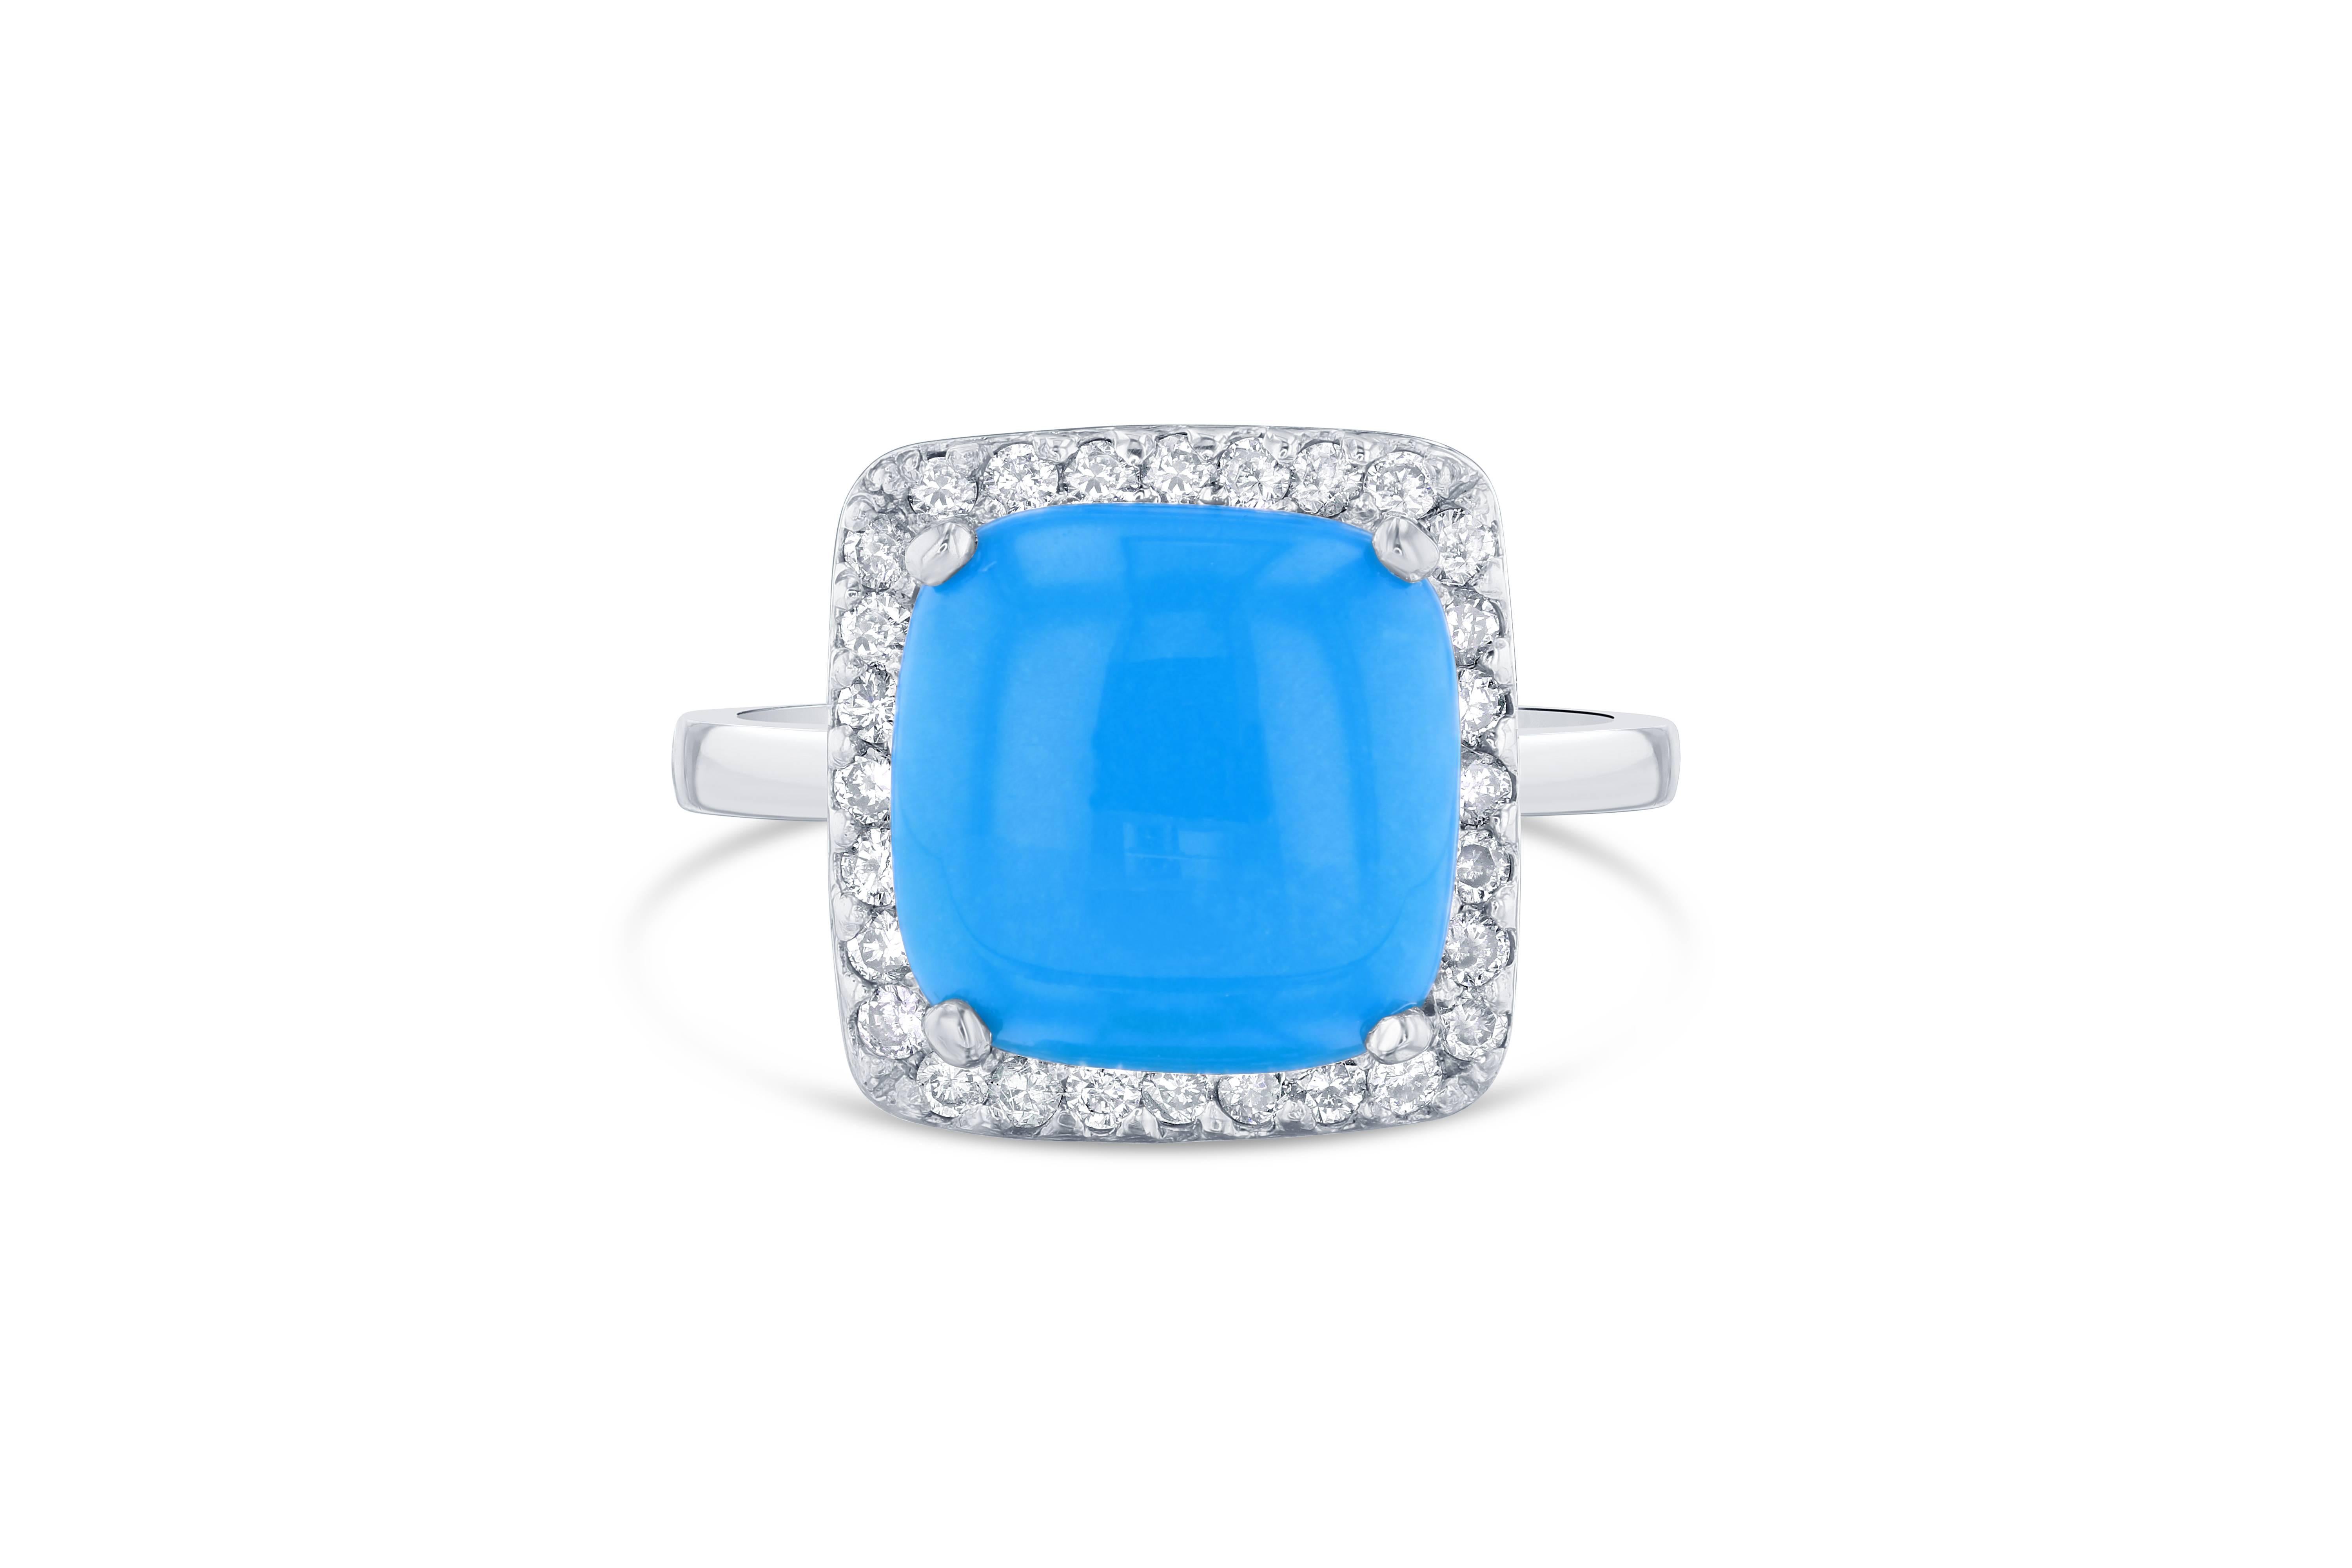 This unique Turquoise and Diamond Ring is delicate yet will make a statement on your finger. 
The Turquoise is Square Cut and weighs 3.03 Carats surrounded by 28 Round Cut Diamonds weighing 0.37 Carats. The total carat weight of the ring is 3.40